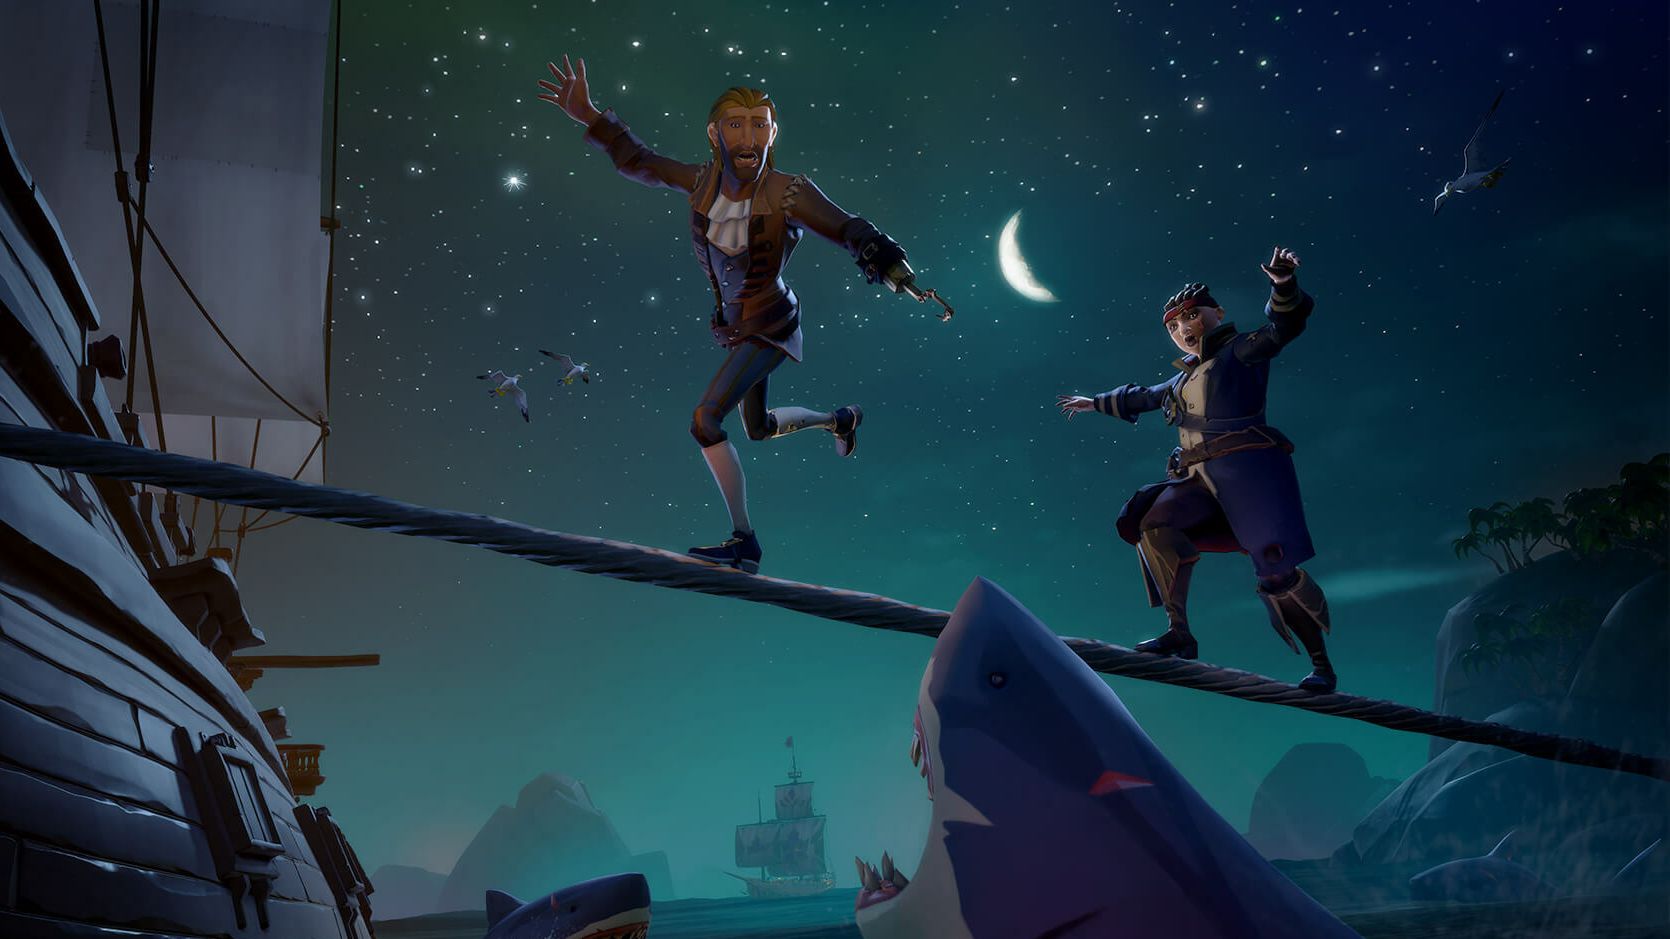 Sea Of Thieves has gone all Lock Stock in Season 12 with double-barreled guns and, er, skeleton summons